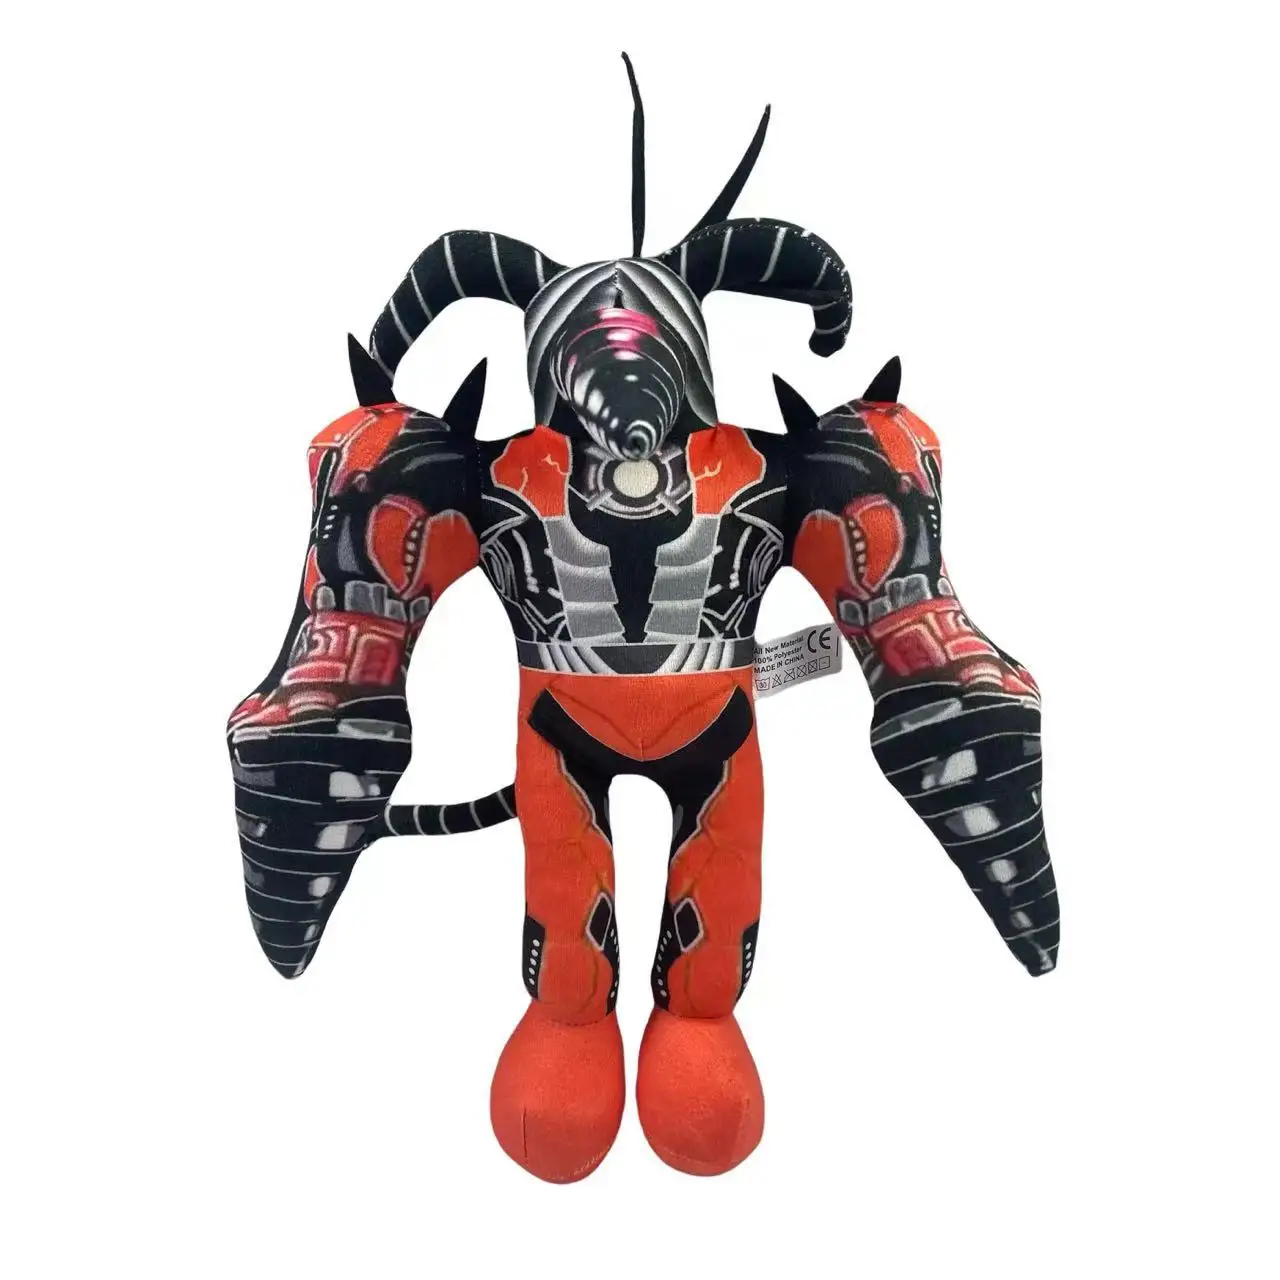 Cross-border New Skibidi Toilet Plush Toilet People Spoof Plush Toy Bull Devil Electric Drill Doll snowmobile electric double shock absorption booster bicycle overseas warehouse cross border electricity business generation